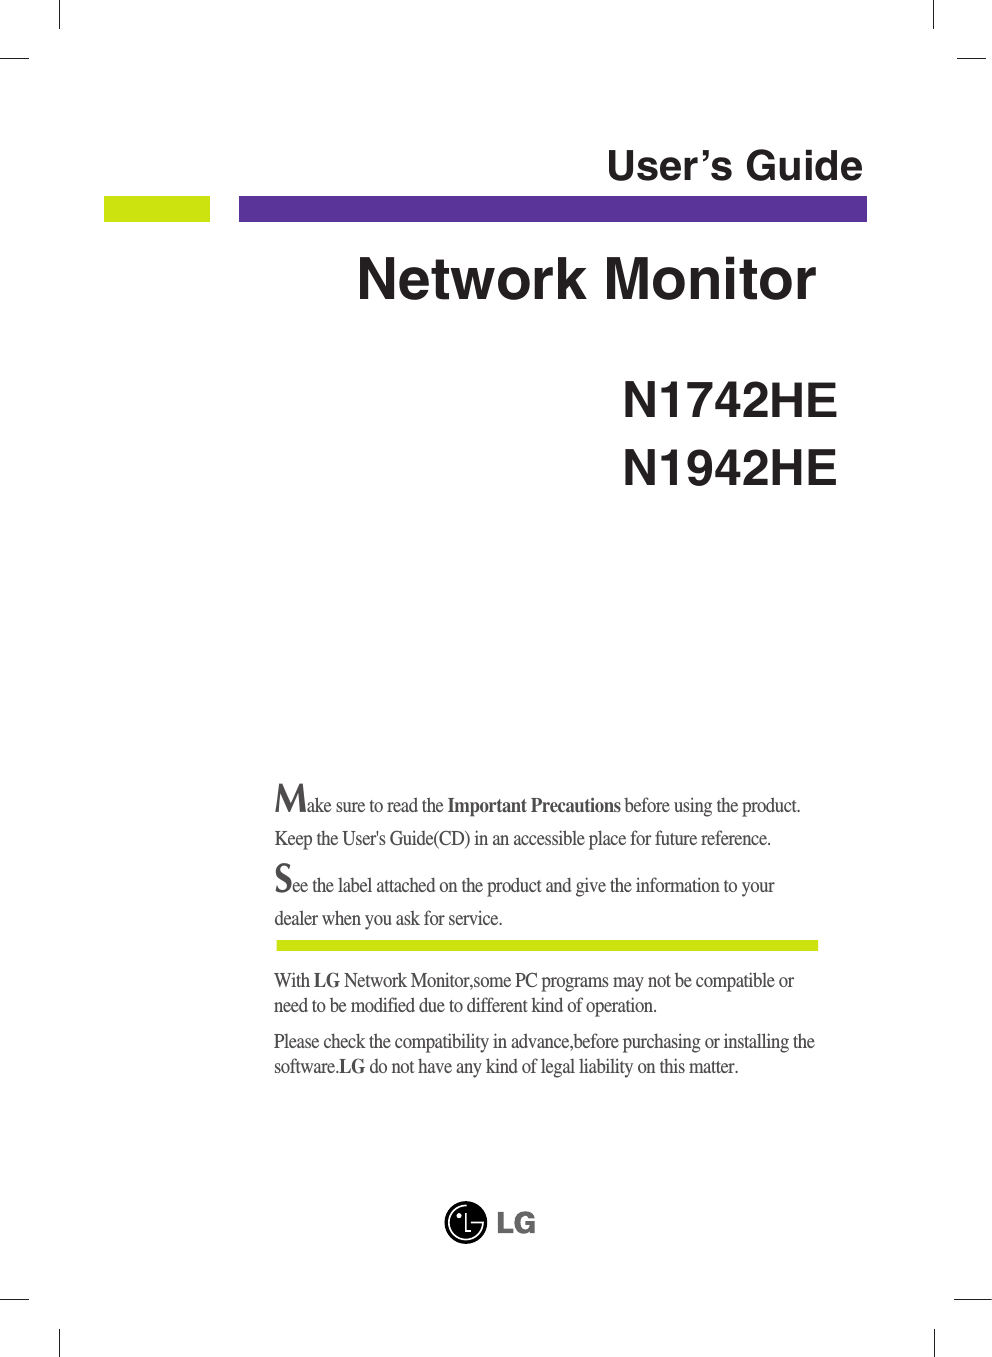 Make sure to read the Important Precautions before using the product. Keep the User&apos;s Guide(CD) in an accessible place for future reference.See the label attached on the product and give the information to yourdealer when you ask for service.N1742HEN1942HEUser’s GuideNetwork MonitorWith LG Network Monitor,some PC programs may not be compatible orneed to be modified due to different kind of operation.Please check the compatibility in advance,before purchasing or installing thesoftware.LG do not have any kind of legal liability on this matter.